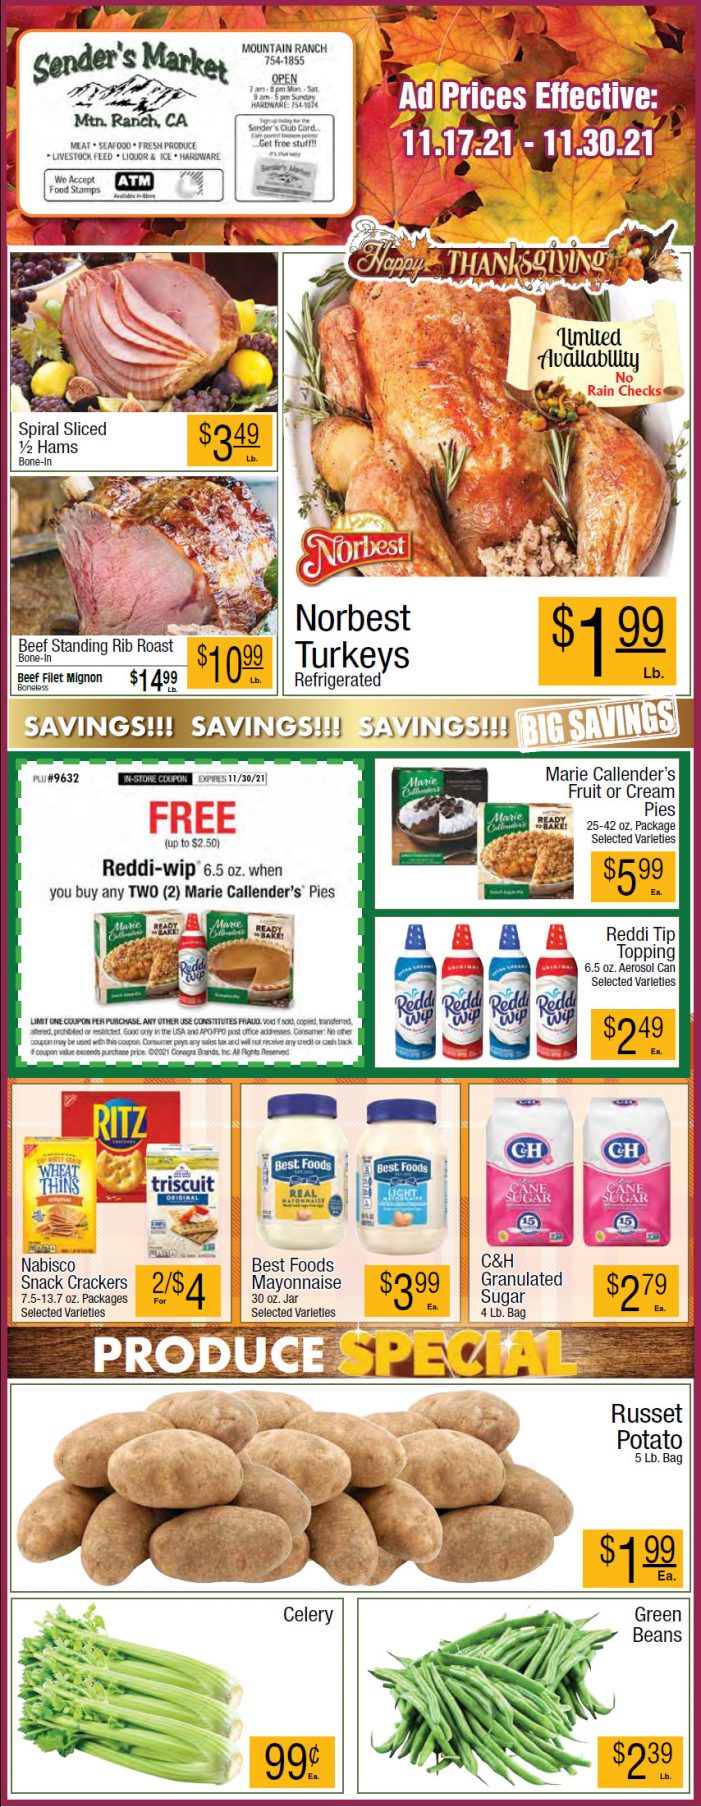 Sender’s Market’s Weekly Ad & Grocery Specials Through November 30th! Shop Local & Save!